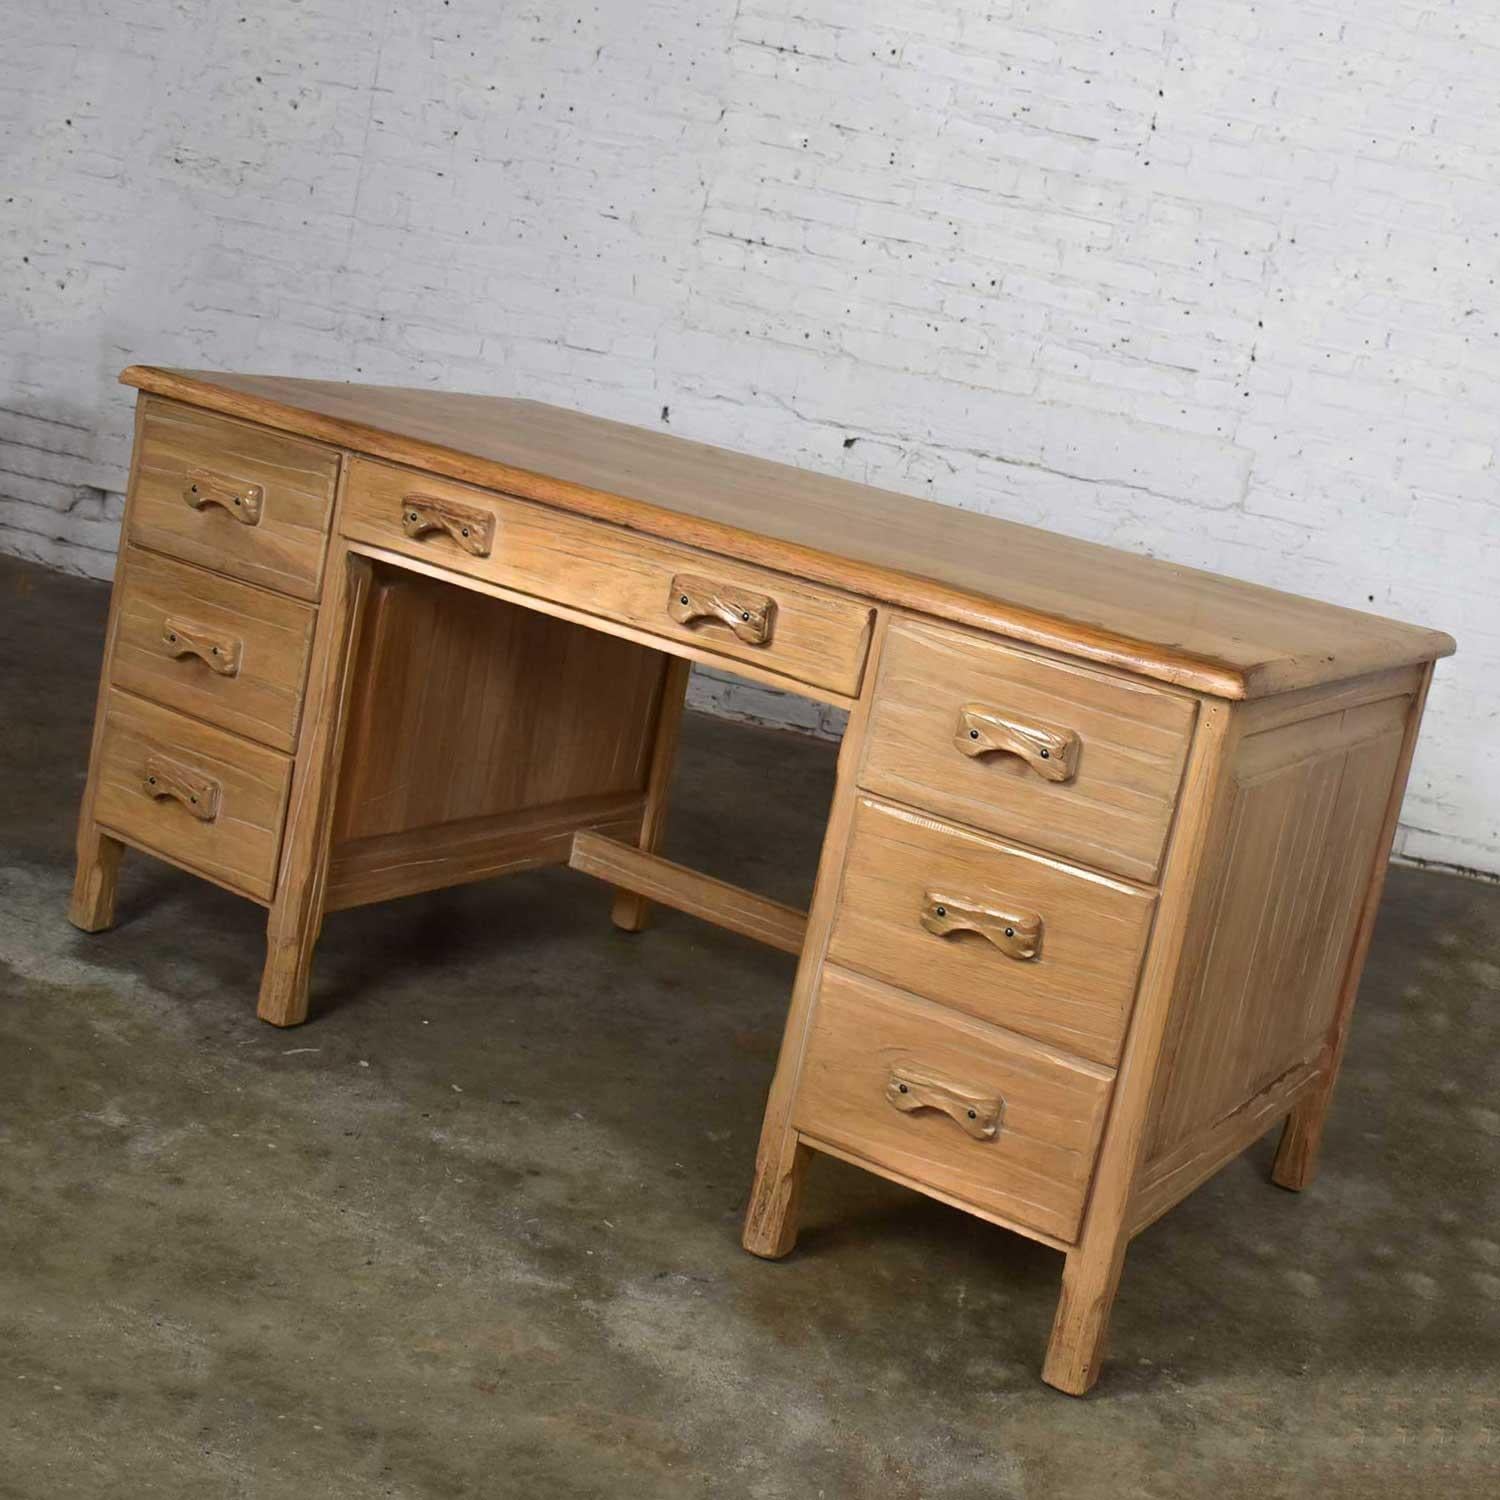 Fabulous desk by A. Brandt Company comprised of solid ranch oak with honey oak finish. Beautiful original vintage condition. It has been cleaned and touched up and any worn spots are noted in photos. Only normal wear for age. The top does have more